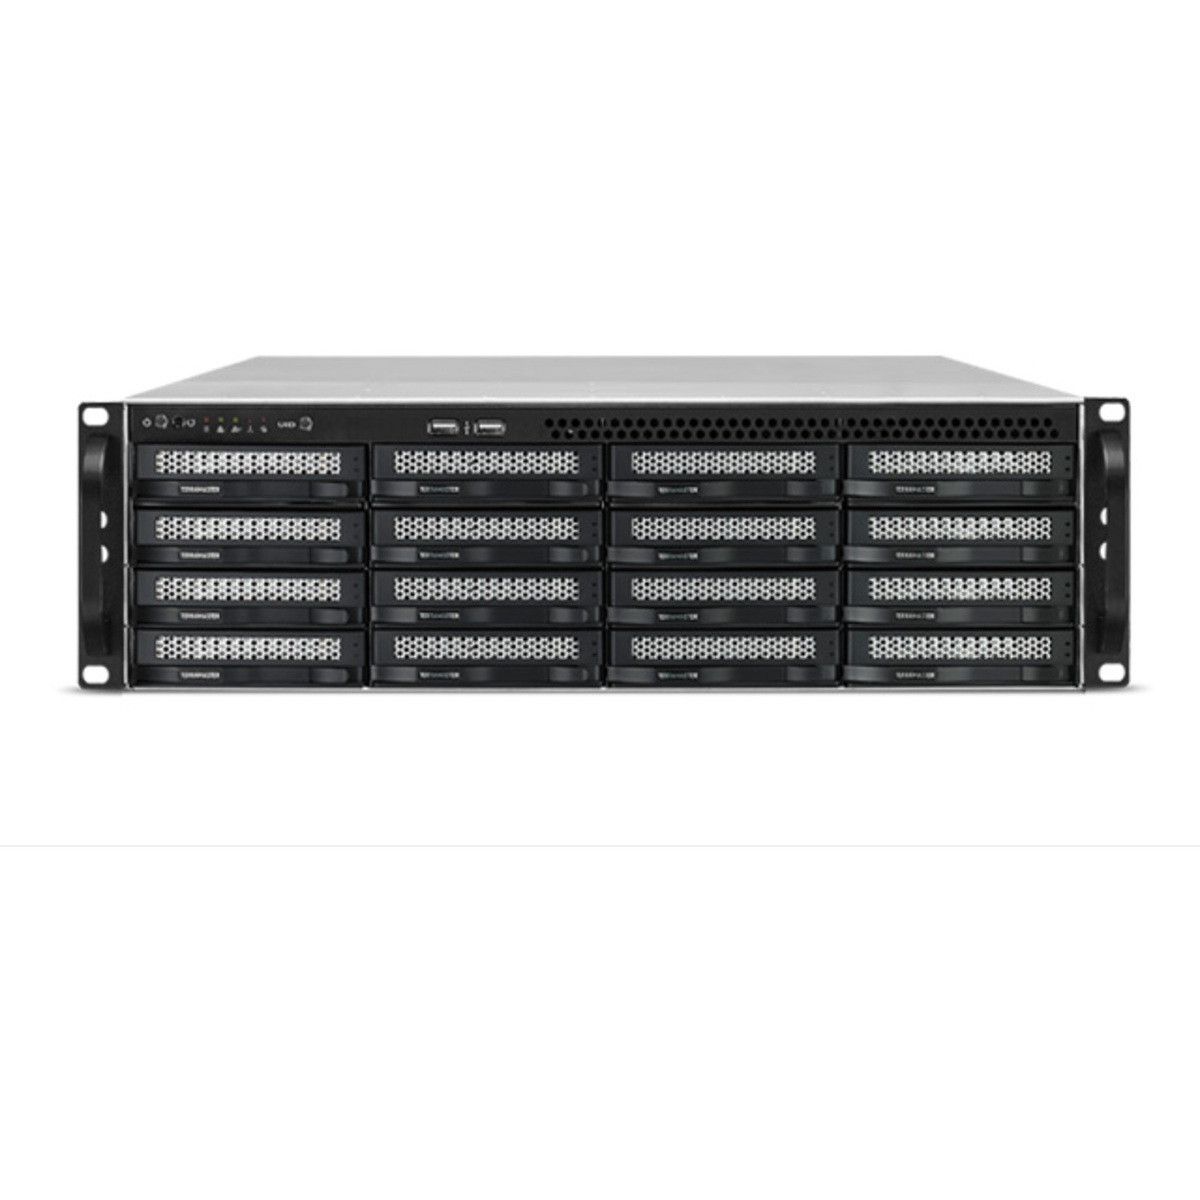 TerraMaster U16-722-2224 150tb 16-Bay RackMount Large Business / Enterprise NAS - Network Attached Storage Device 15x10tb Seagate IronWolf ST10000VN000 3.5 7200rpm SATA 6Gb/s HDD NAS Class Drives Installed - Burn-In Tested U16-722-2224